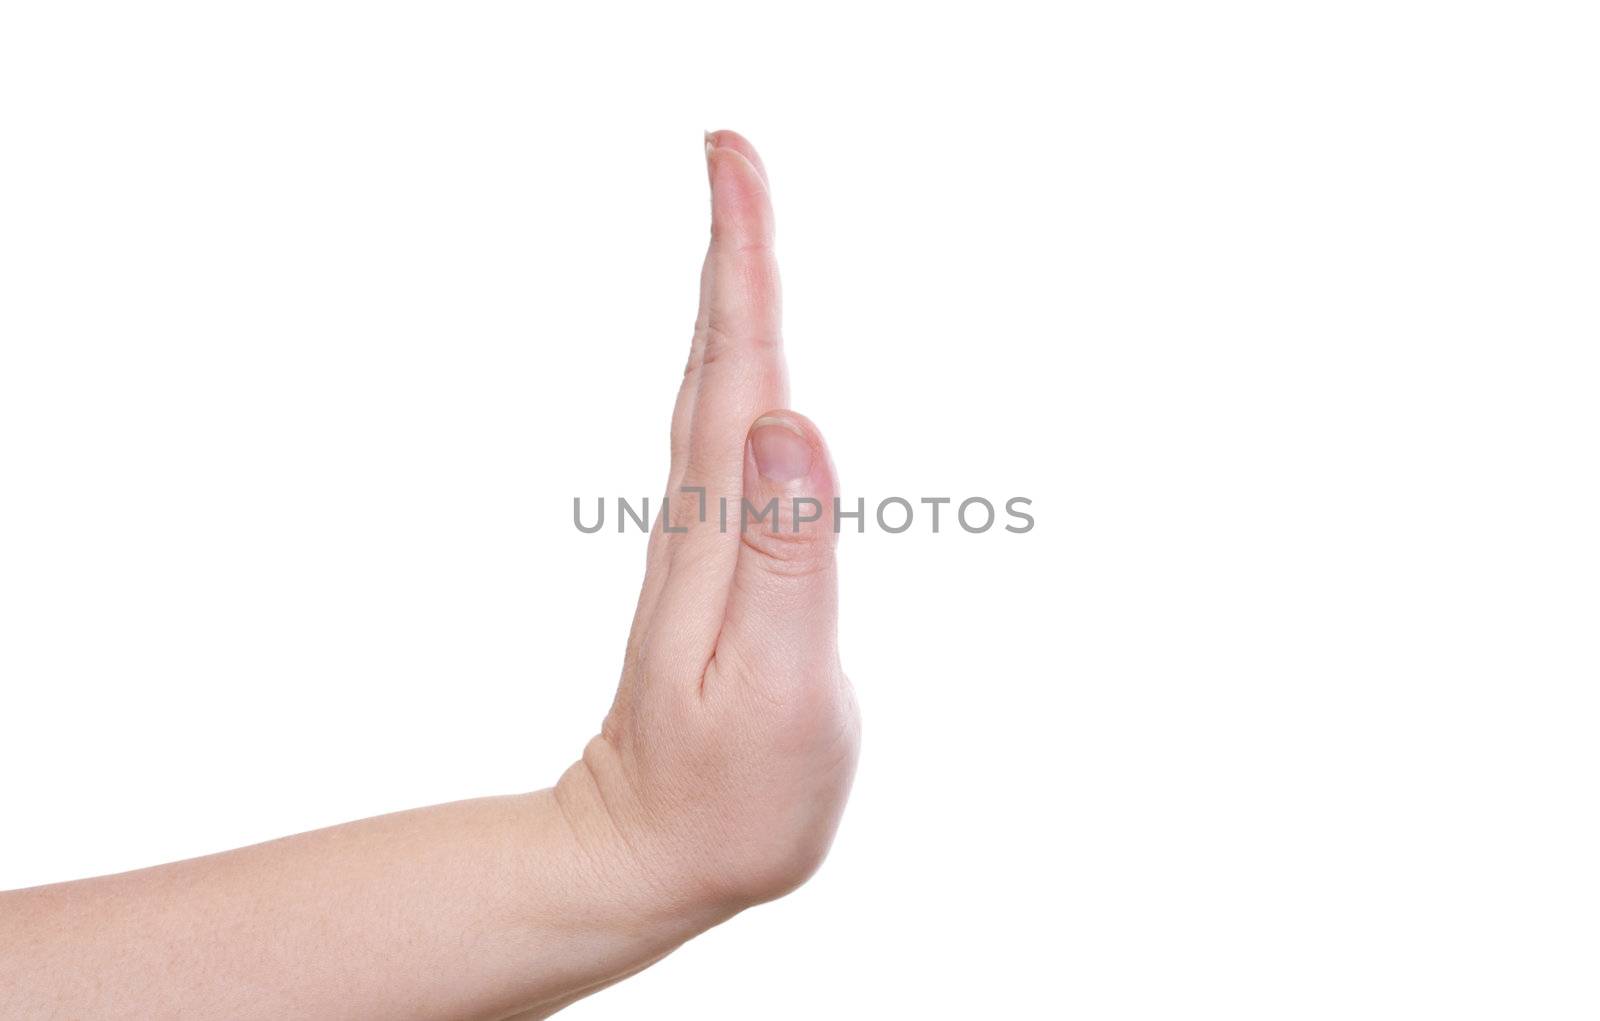 The human palm on a white background shows refusal